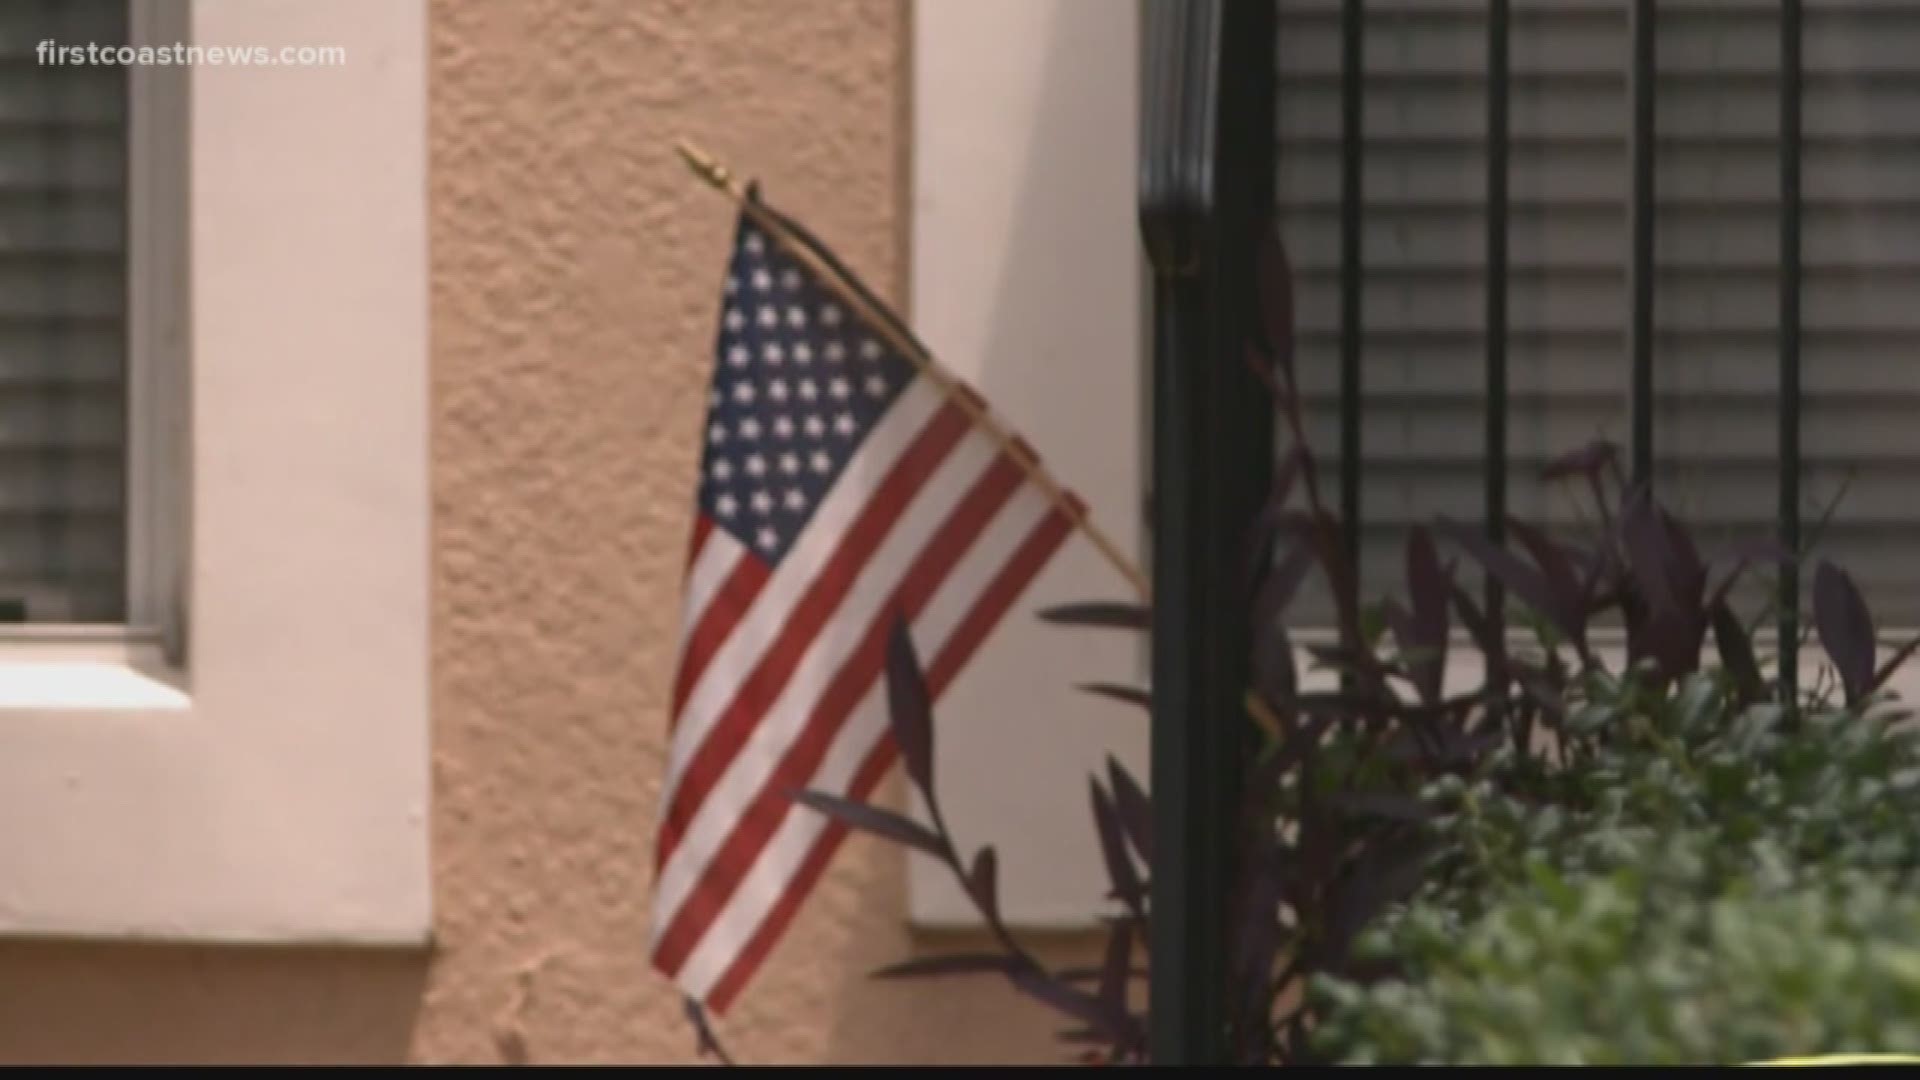 A veteran says a disagreement with his homeowner's association over the placement of Old Glory has forced him to sell his home.